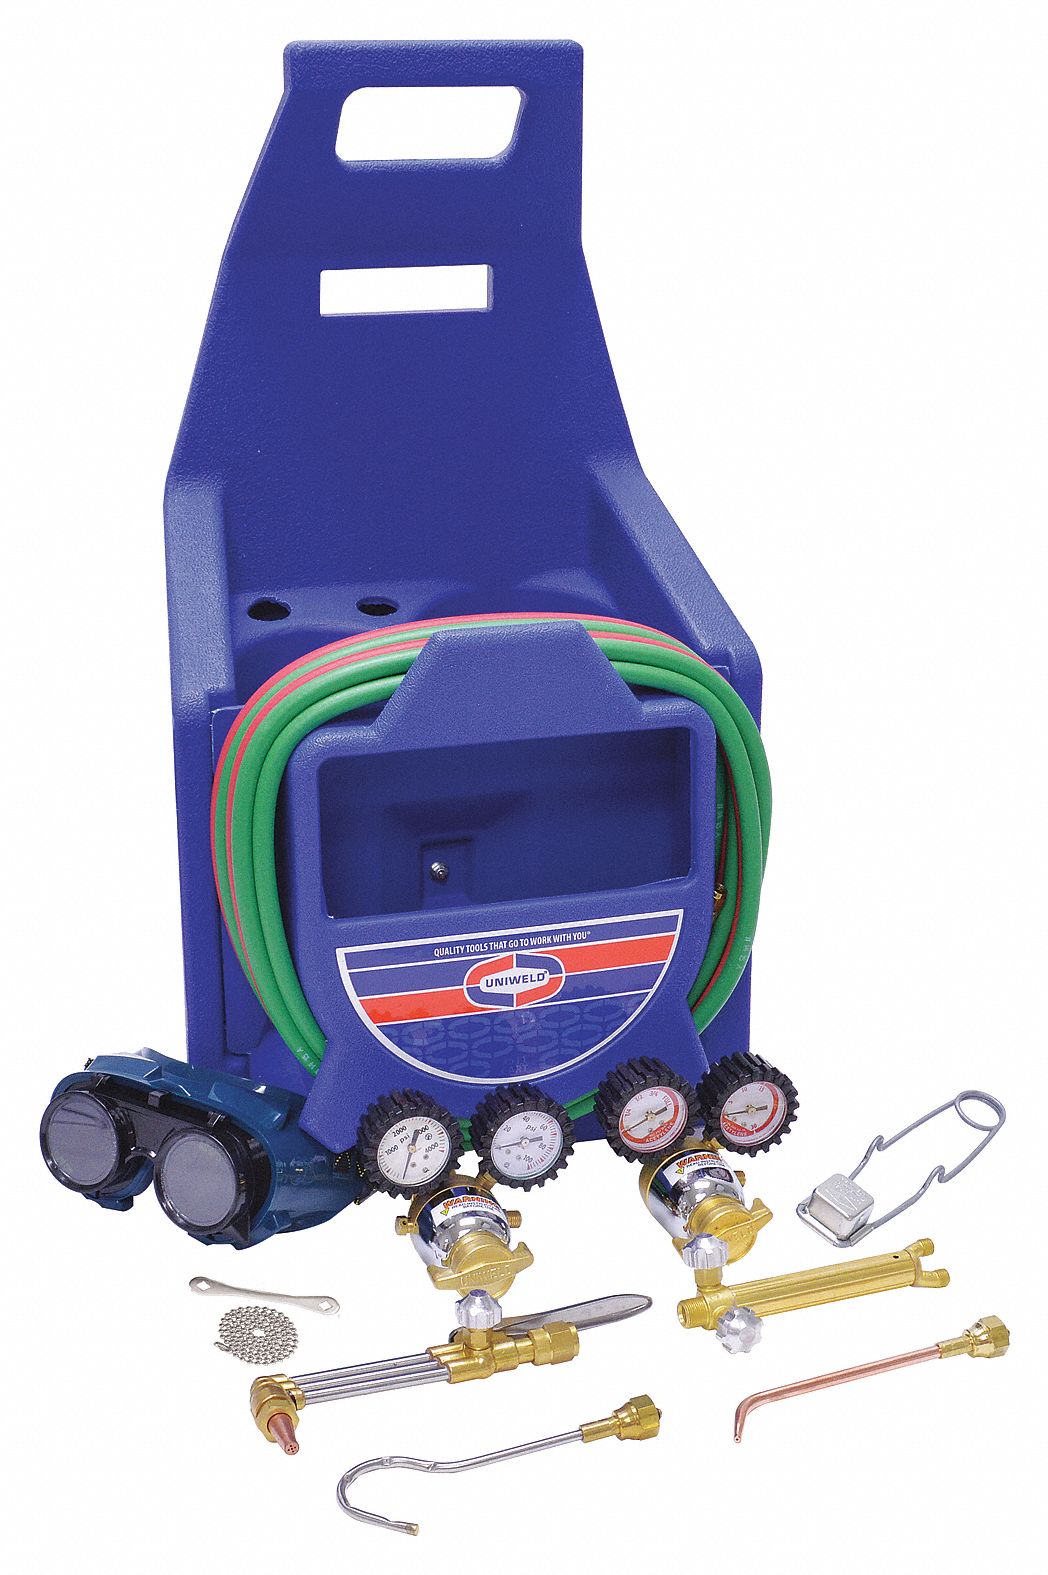 UNIWELD KL22P - Welding and Cutting Kit No Tanks